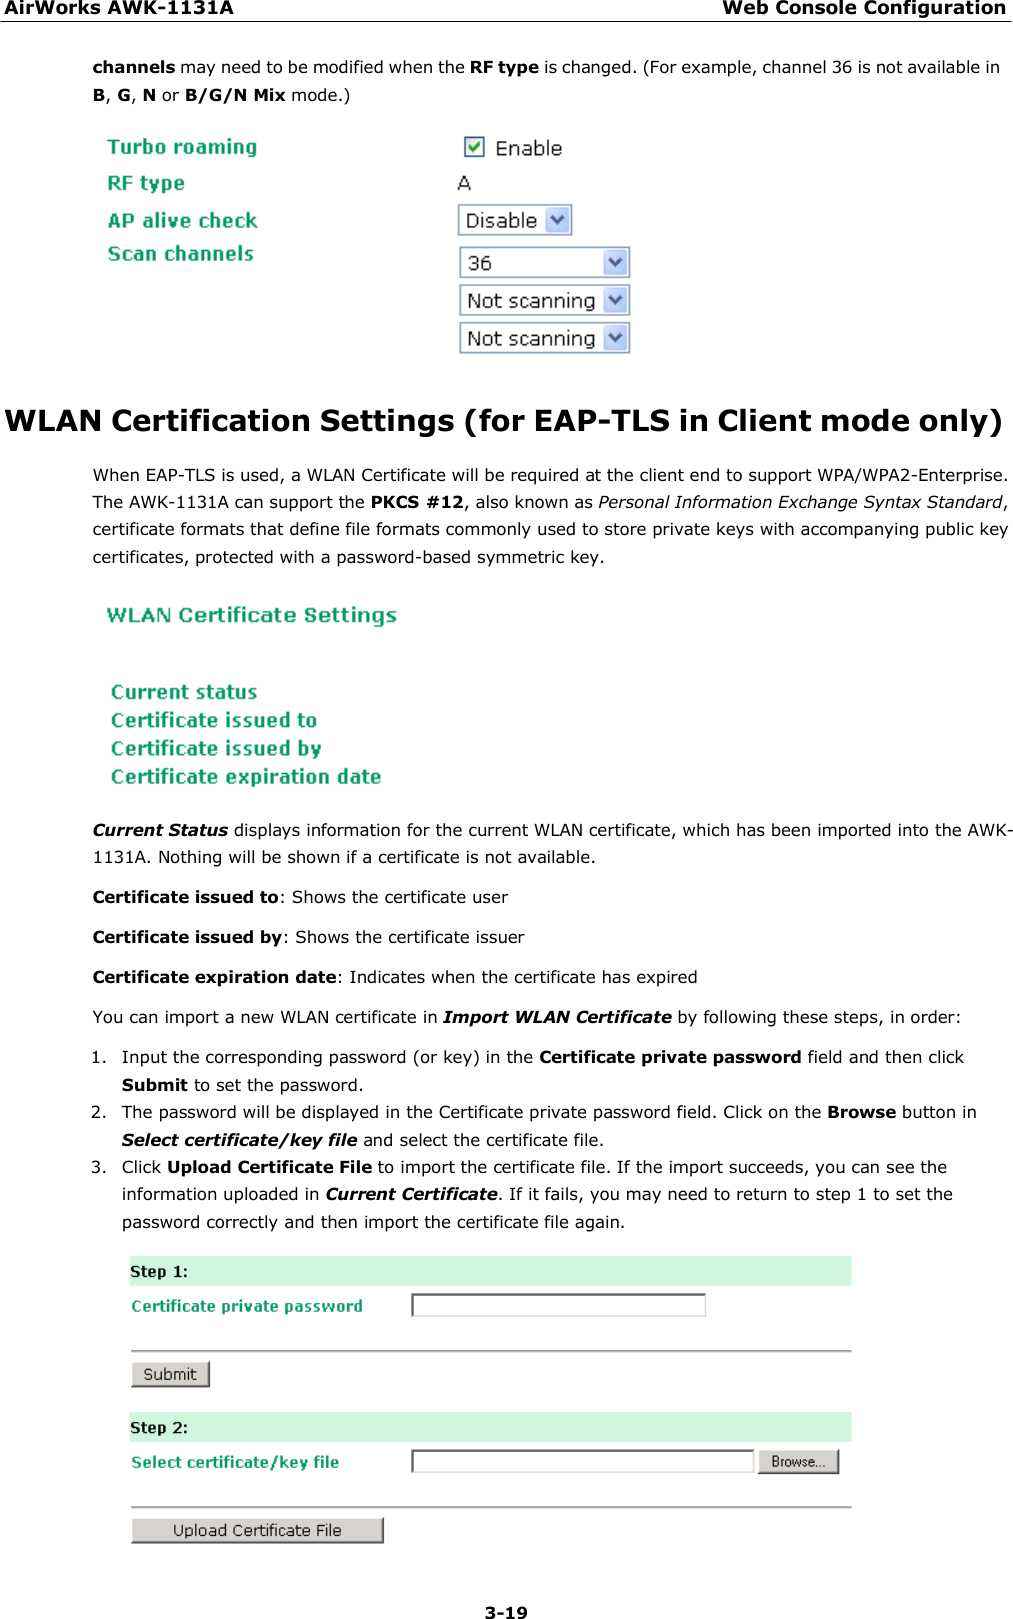 AirWorks AWK-1131A Web Console Configuration 3-19    channels may need to be modified when the RF type is changed. (For example, channel 36 is not available in B, G, N or B/G/N Mix mode.)     WLAN Certification Settings (for EAP-TLS in Client mode only)  When EAP-TLS is used, a WLAN Certificate will be required at the client end to support WPA/WPA2-Enterprise. The AWK-1131A can support the PKCS #12, also known as Personal Information Exchange Syntax Standard, certificate formats that define file formats commonly used to store private keys with accompanying public key certificates, protected with a password-based symmetric key.    Current Status displays information for the current WLAN certificate, which has been imported into the AWK-1131A. Nothing will be shown if a certificate is not available.  Certificate issued to: Shows the certificate user  Certificate issued by: Shows the certificate issuer  Certificate expiration date: Indicates when the certificate has expired  You can import a new WLAN certificate in Import WLAN Certificate by following these steps, in order:  1. Input the corresponding password (or key) in the Certificate private password field and then click Submit to set the password. 2. The password will be displayed in the Certificate private password field. Click on the Browse button in Select certificate/key file and select the certificate file. 3. Click Upload Certificate File to import the certificate file. If the import succeeds, you can see the information uploaded in Current Certificate. If it fails, you may need to return to step 1 to set the password correctly and then import the certificate file again.  